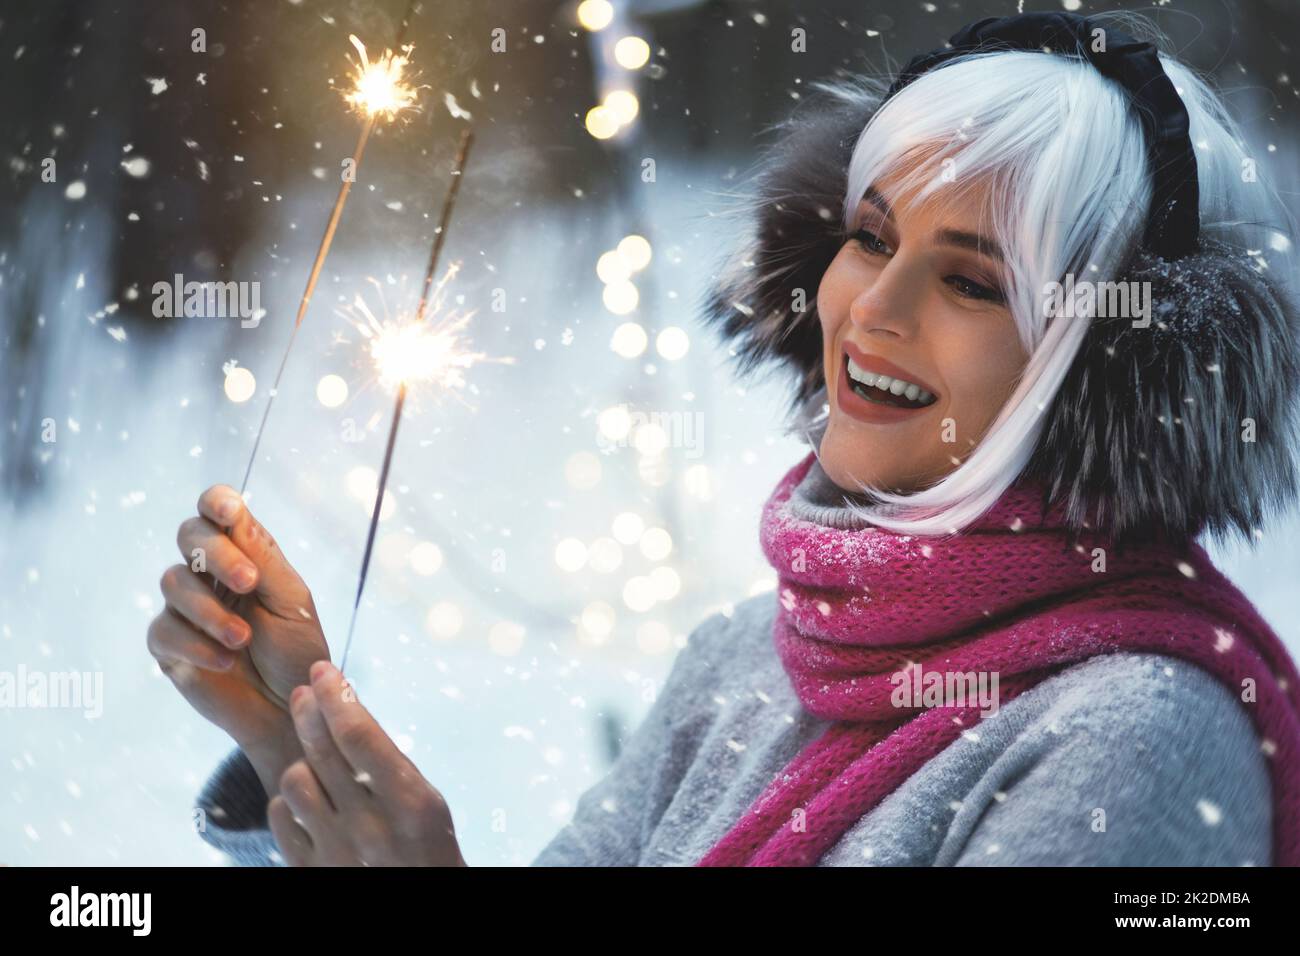 Young happy woman with sparklers in the winter snowy forest Stock Photo